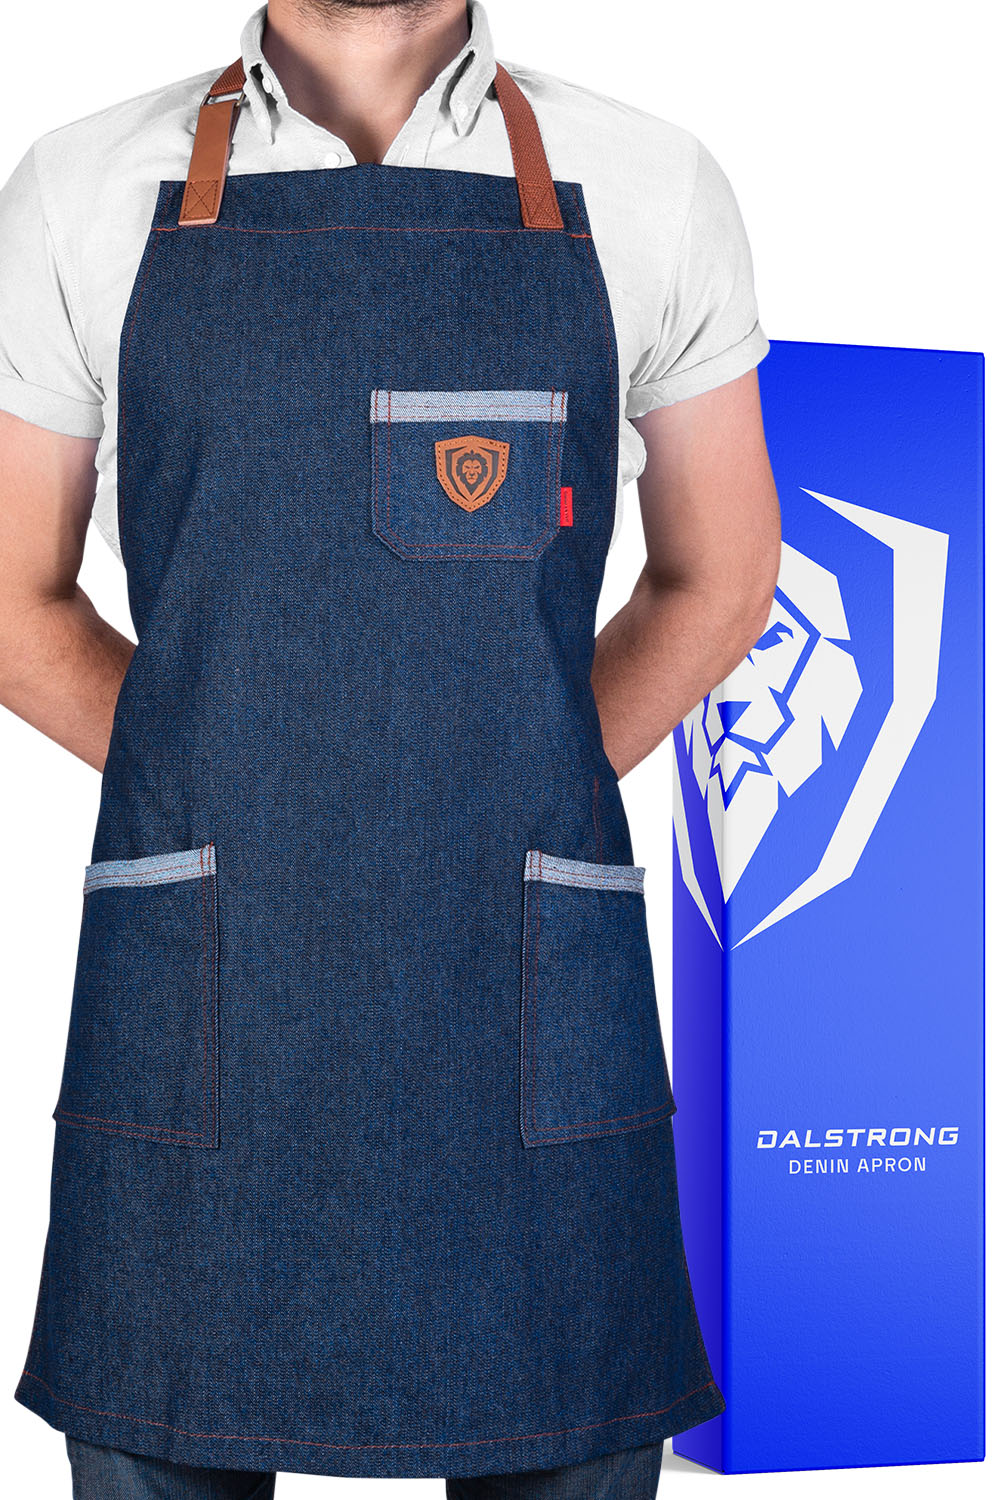 Dalstrong american legend blue denim professional chef's kitchen apron in front of it's premium packaging.